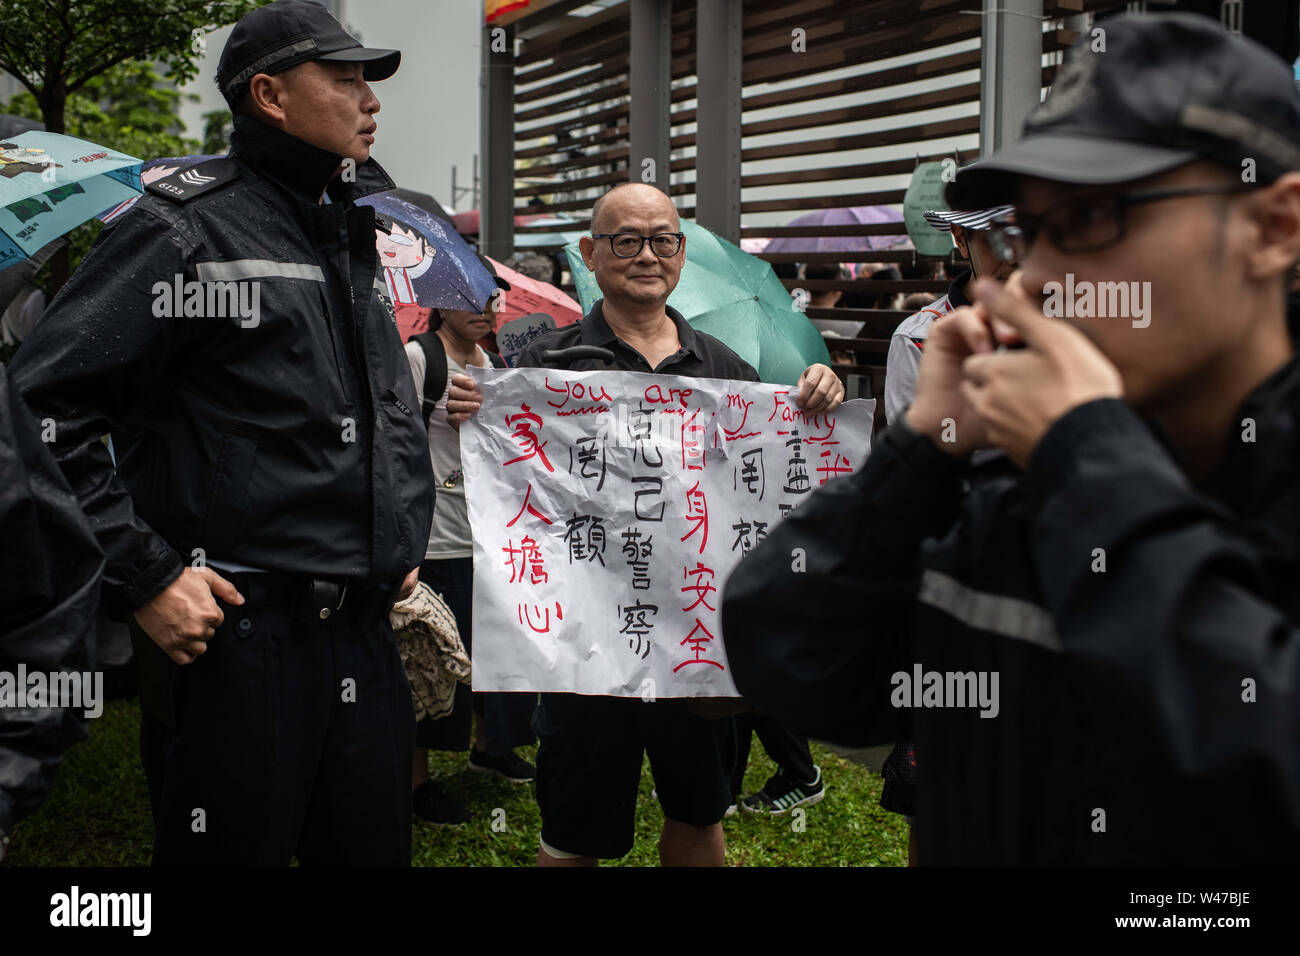 A man receives protection from a group of policemen after been lashed because of his poster with a supportive message to the police.Government supporters show up in number of tens of thousands in a pro-police rally, at Tamar Park.  Named Safeguard Hong Kong,  the demonstration was co-organized by 70 pro-Beijing figures and  was attended by local residents, mainland immigrants, members of ethnic minorities, as well as visitors from across the border. Stock Photo